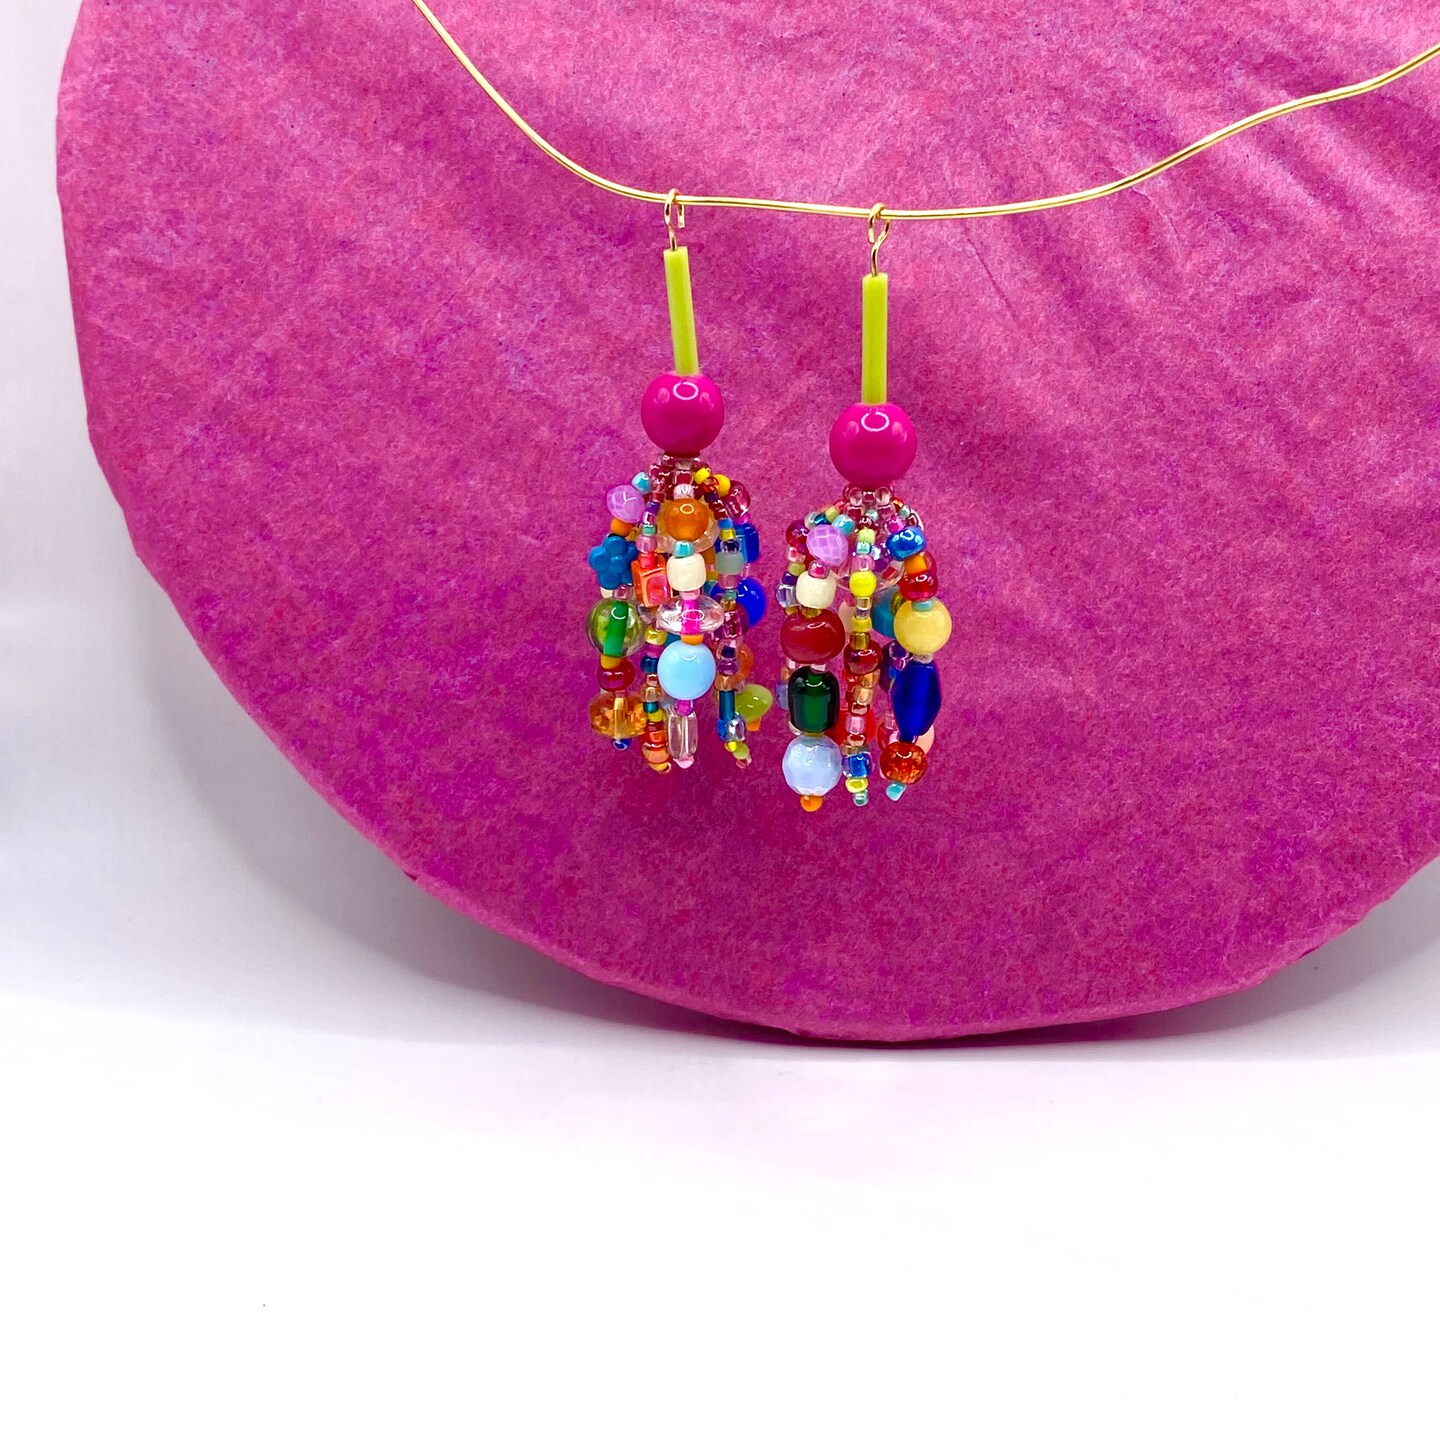 Weird Barbie Whimsy Earrings - Playful Colorful Beaded Design